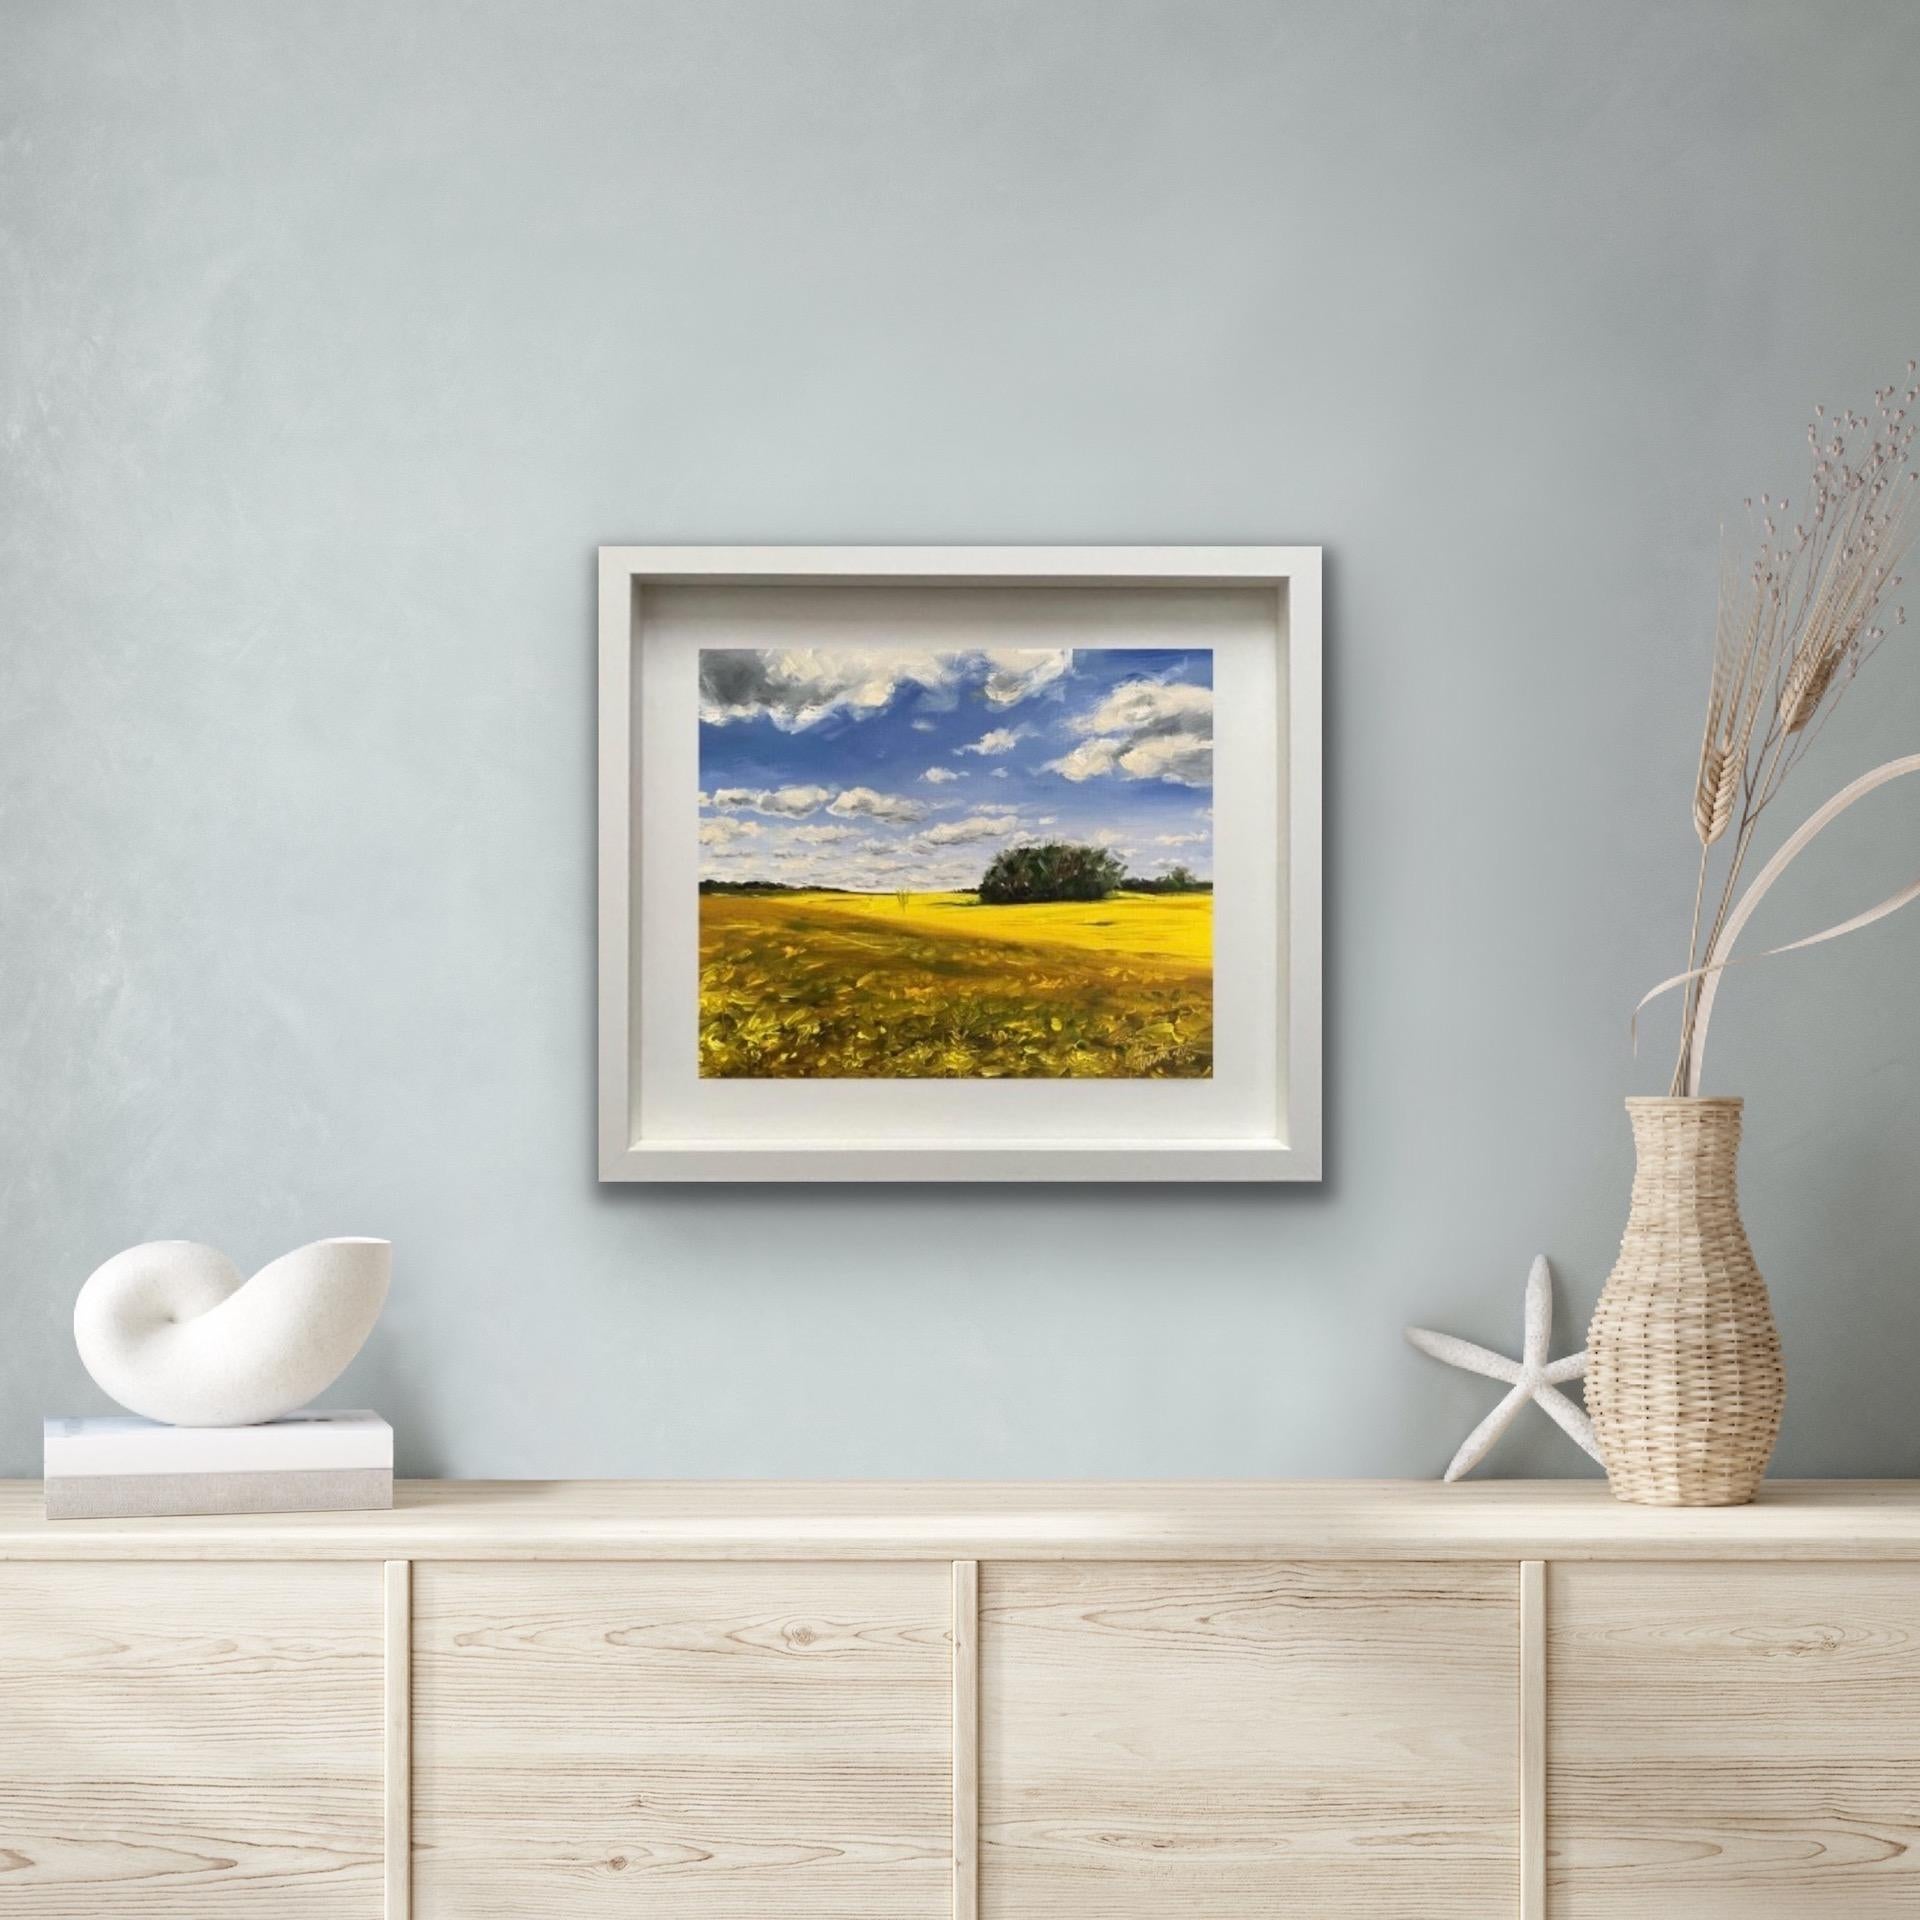 Rapeseed Fields in Cotswold by Tushar Sabale [2020]
Original
Oil on board
Image size: H:30 cm x W:25 cm
Complete Size of Unframed Work: H:30 cm x W:25 cm x D:1cm
Framed Size: H:43 cm x W:38 cm x D:3cm
Sold Framed
Please note that insitu images are